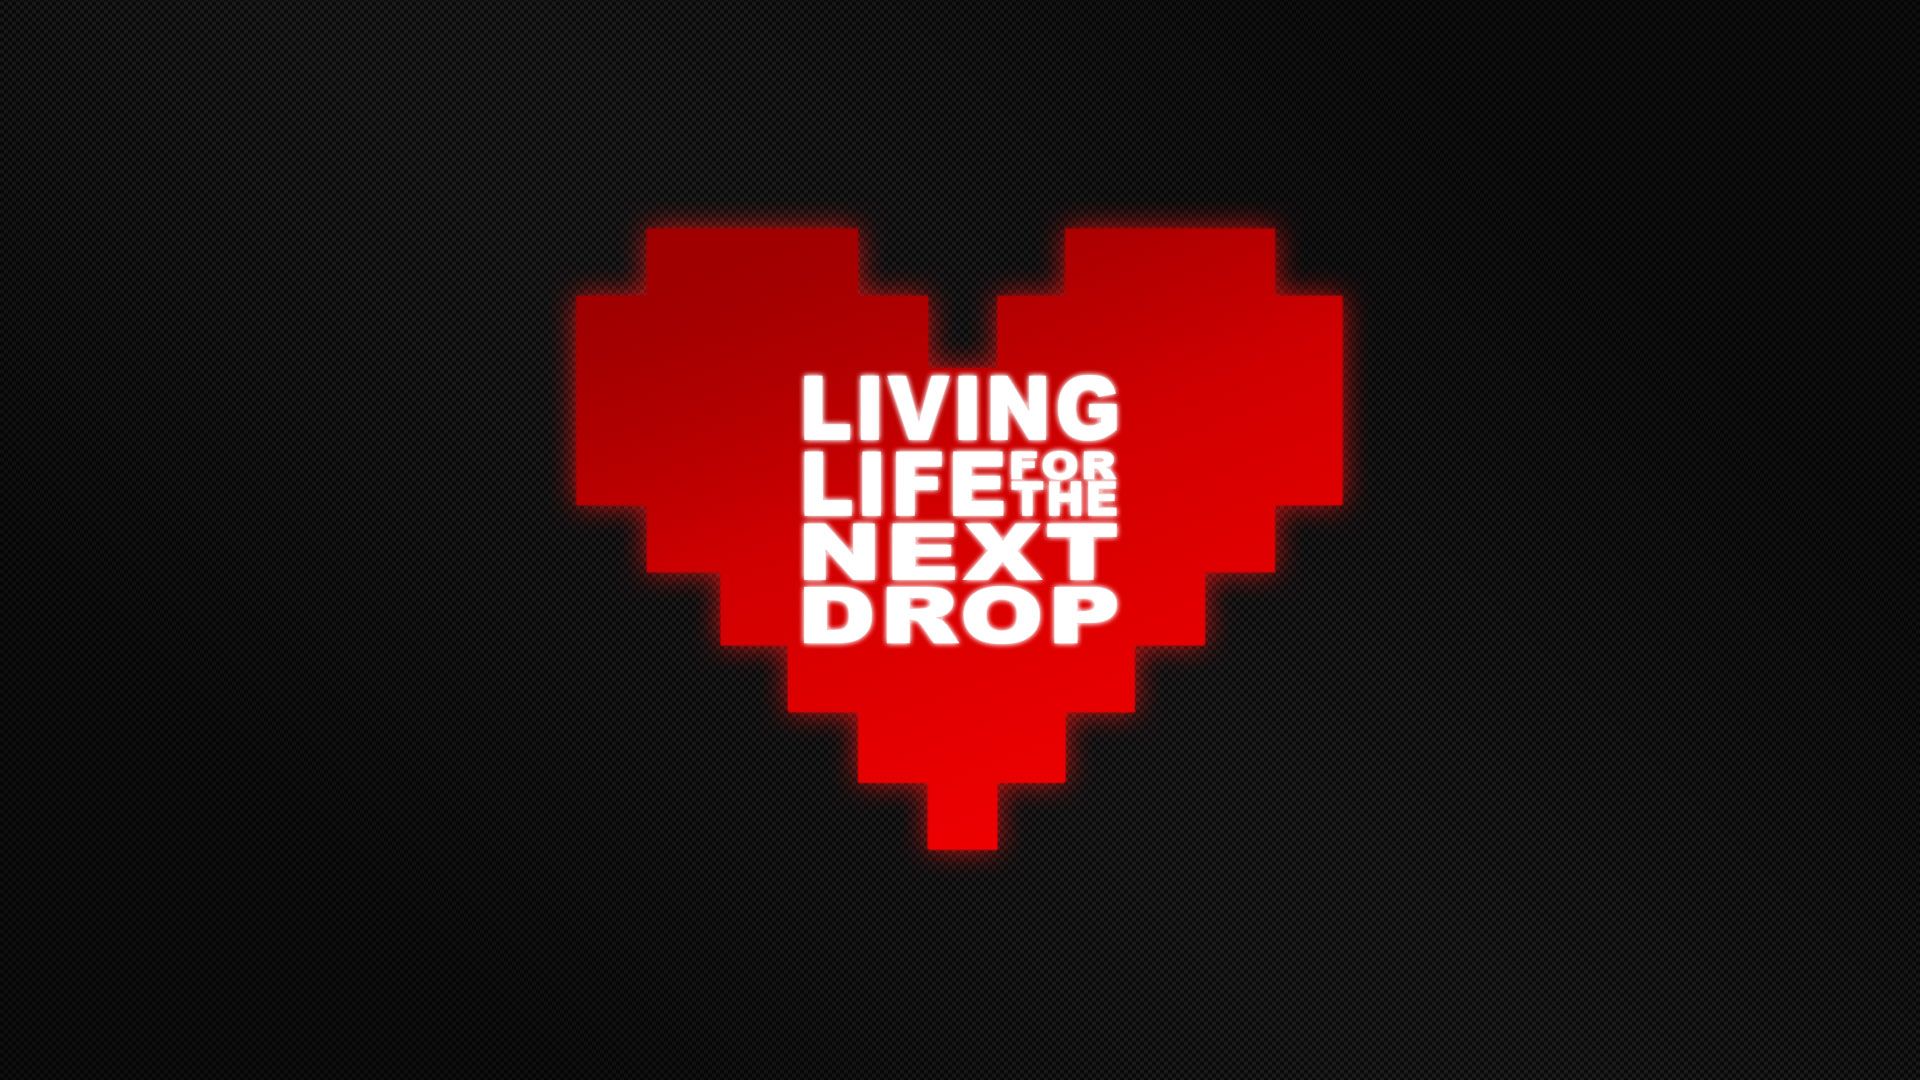 Free download Pegboard Nerds Living life for the next drop